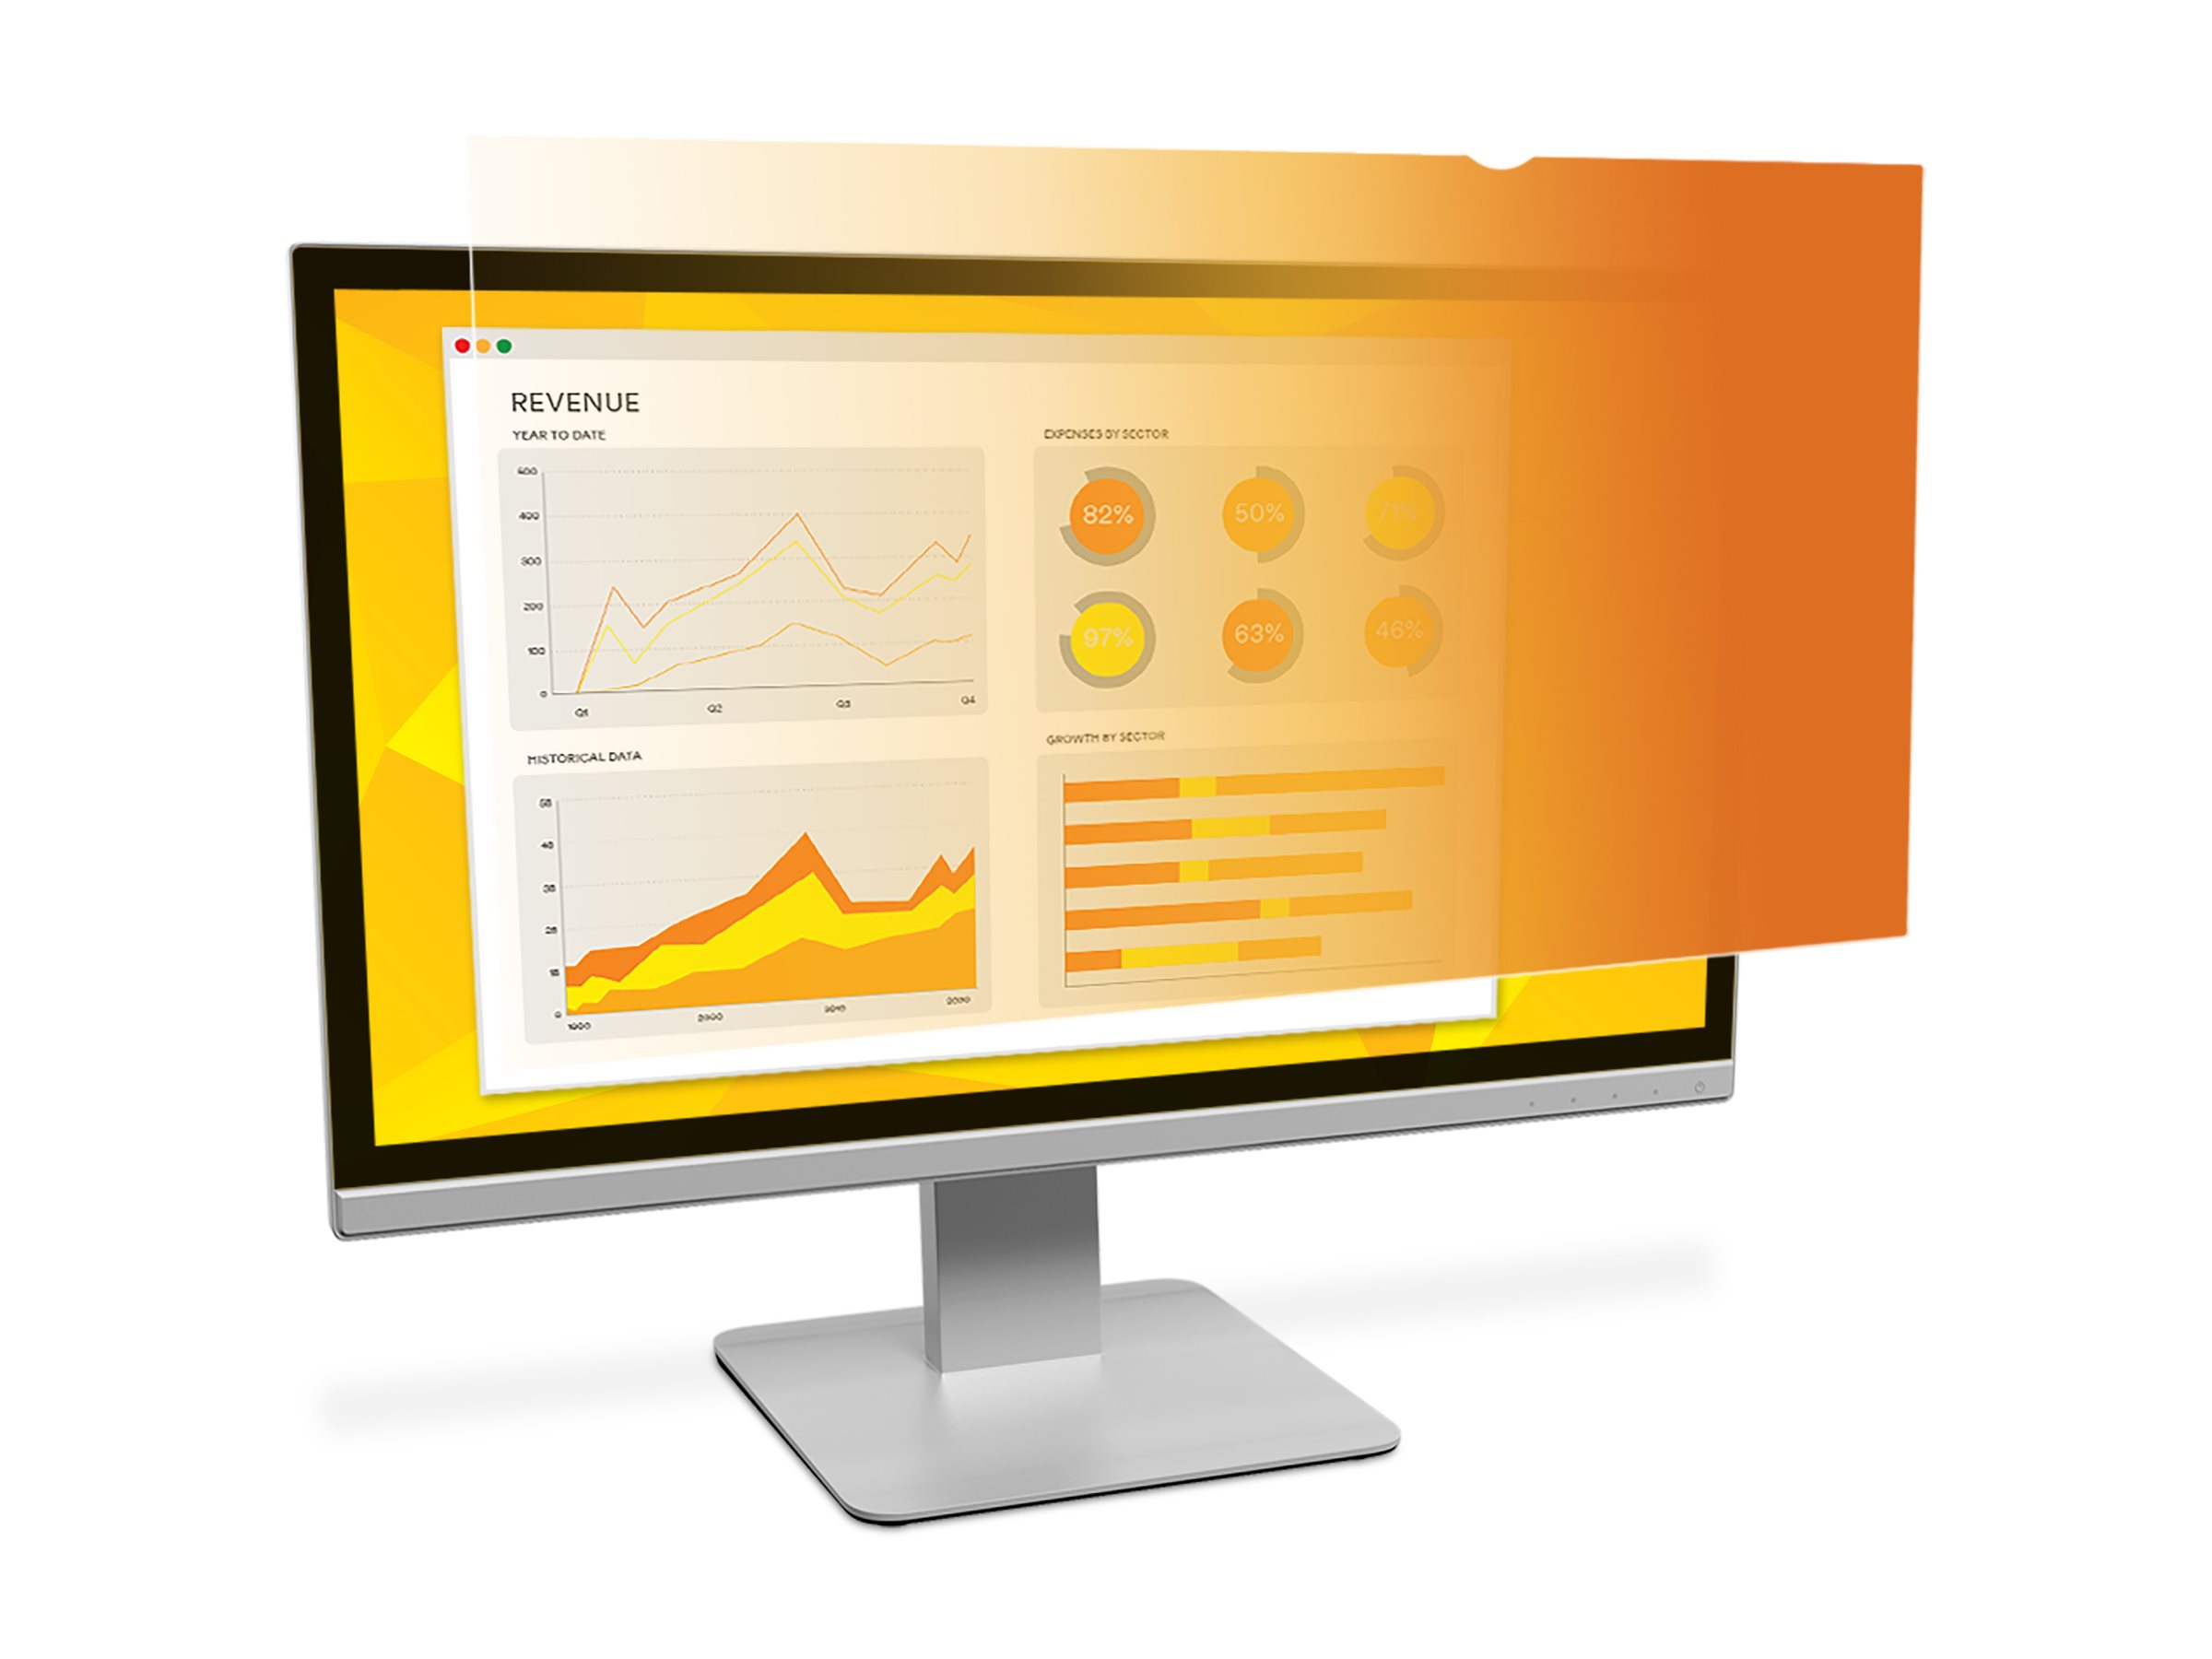 3M 27" Privacy Filter for Widescreen Monitor, Gold - image 1 of 1